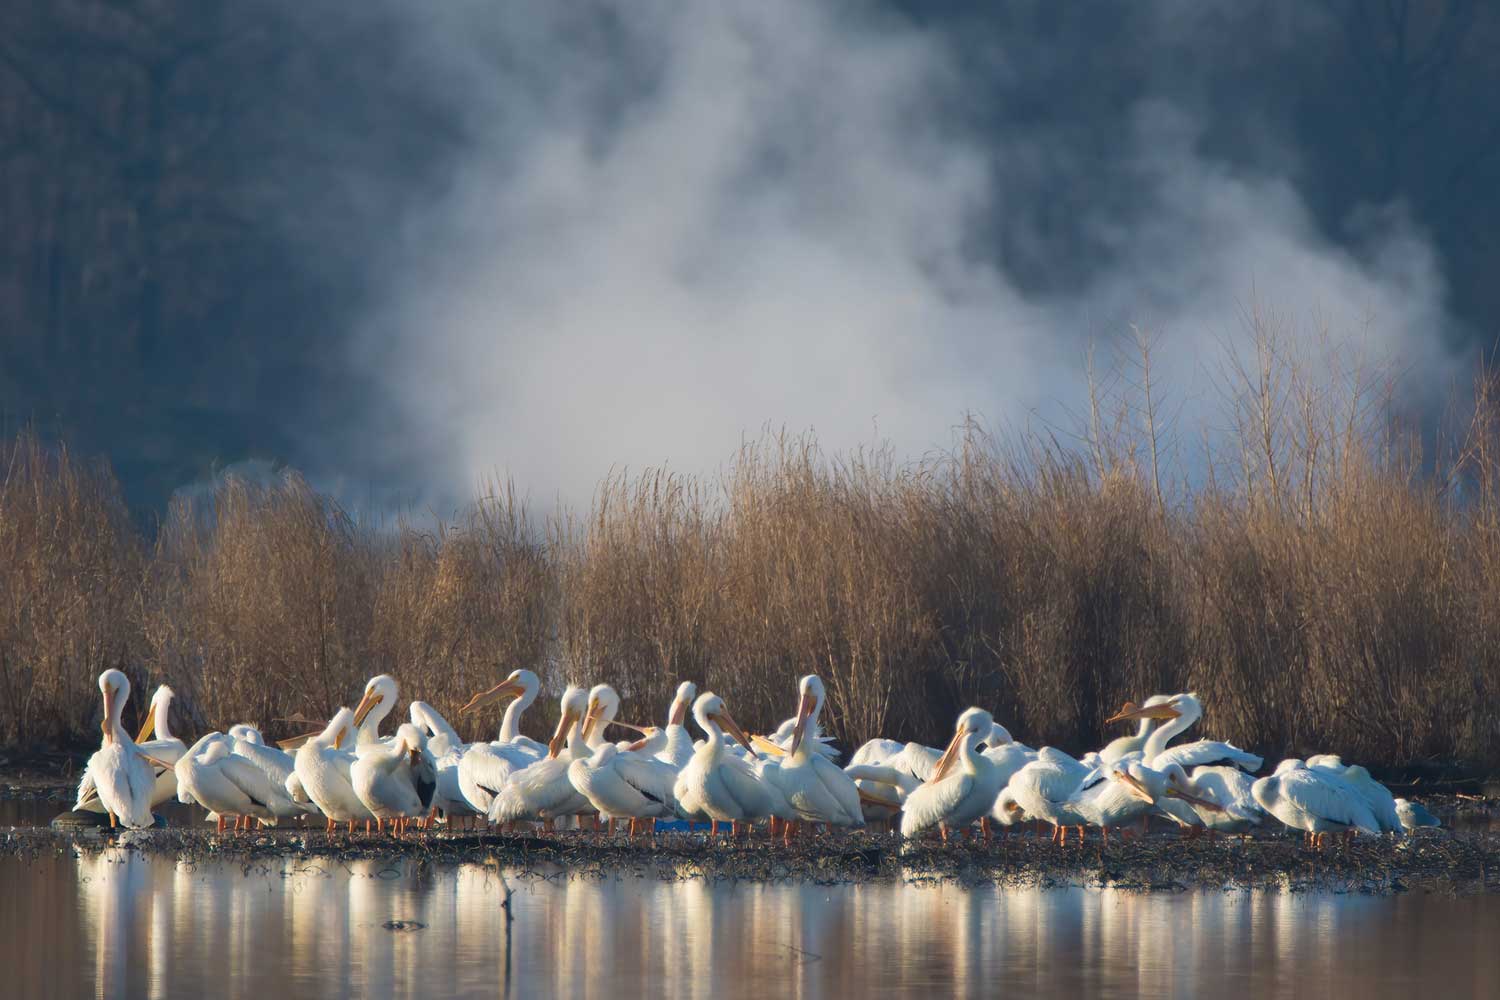 A large flock of pelicans standing on a small island with dried grasses and foggy mist in the background.